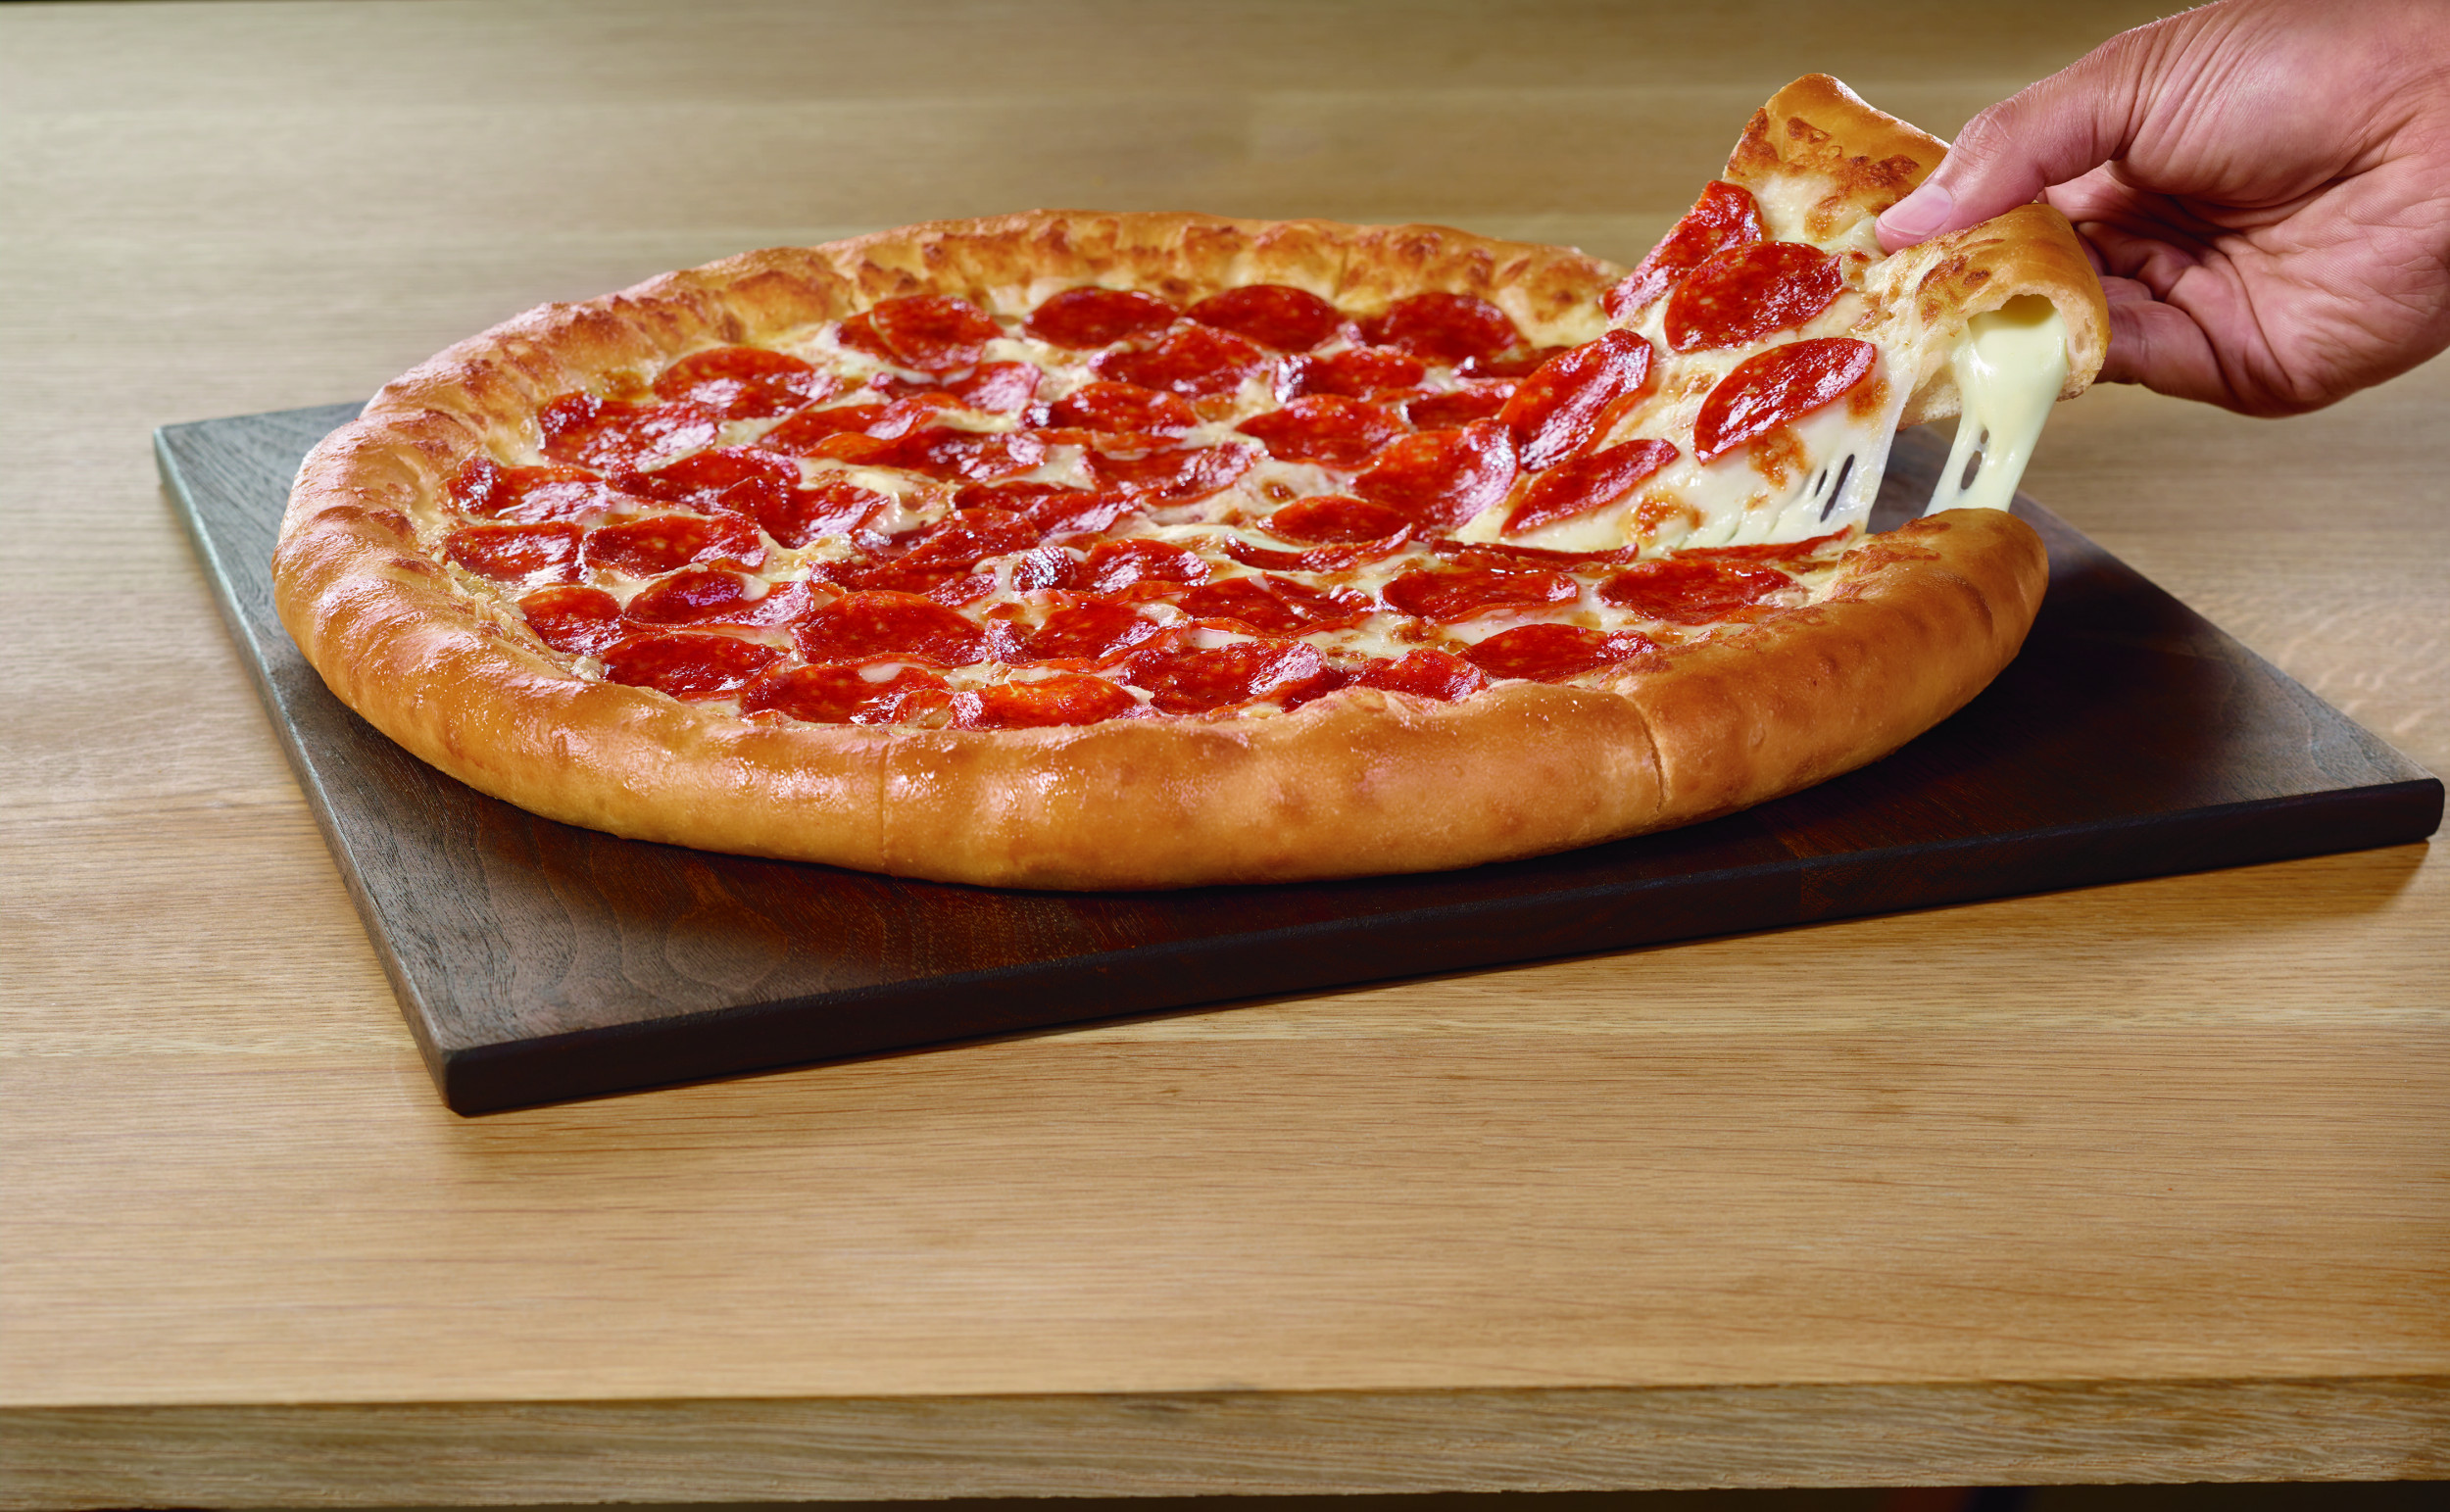 National Pizza Week Deals from Pizza Hut, Domino's, Little Caesar's and More